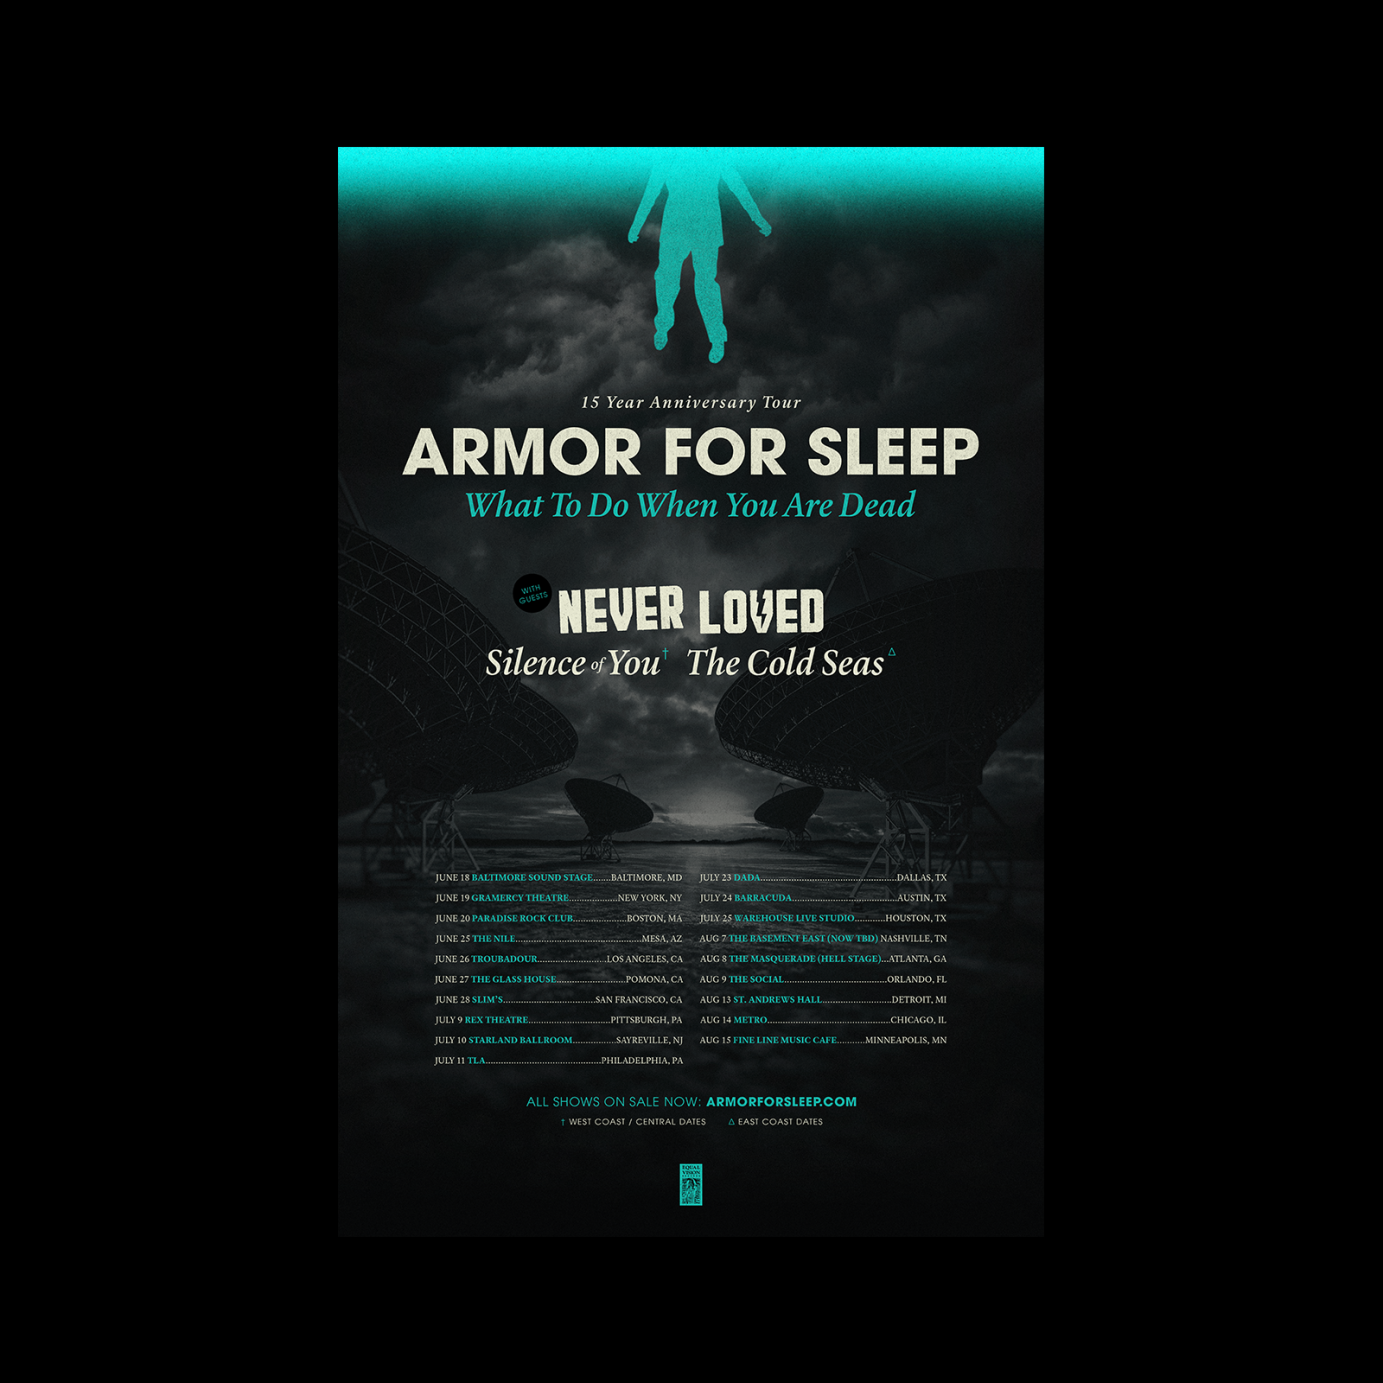 Armor For Sleep - 15 Year Anniversary Tour Poster